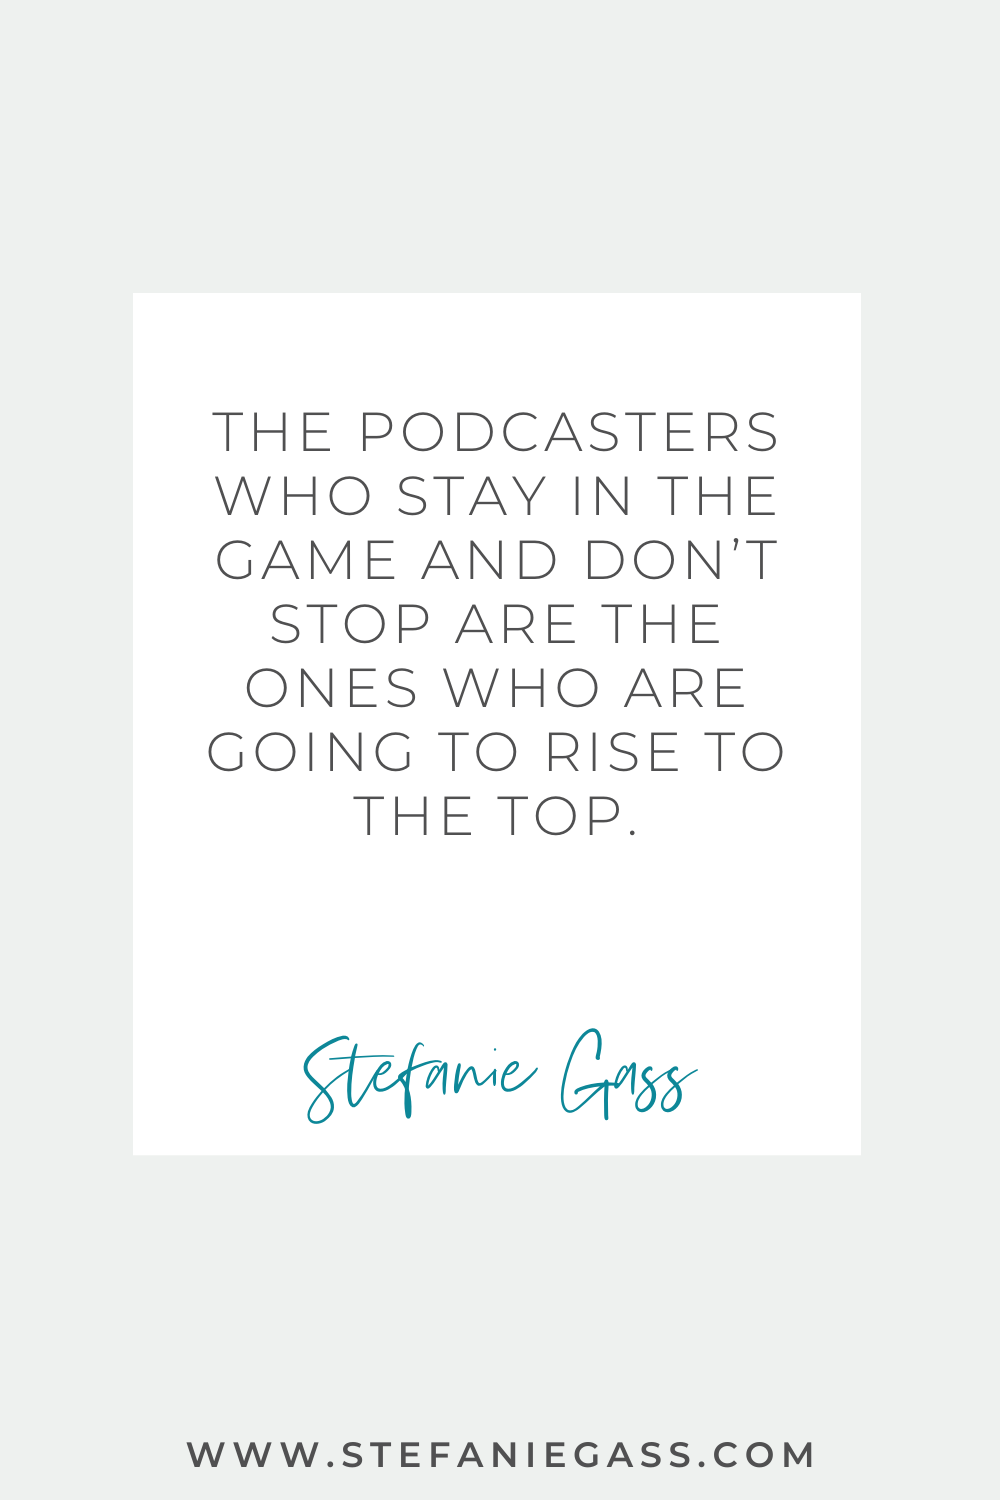 Stefanie Gass Quote: The podcasters who stay in the game and don't stop are the ones who are going to rise to the top.